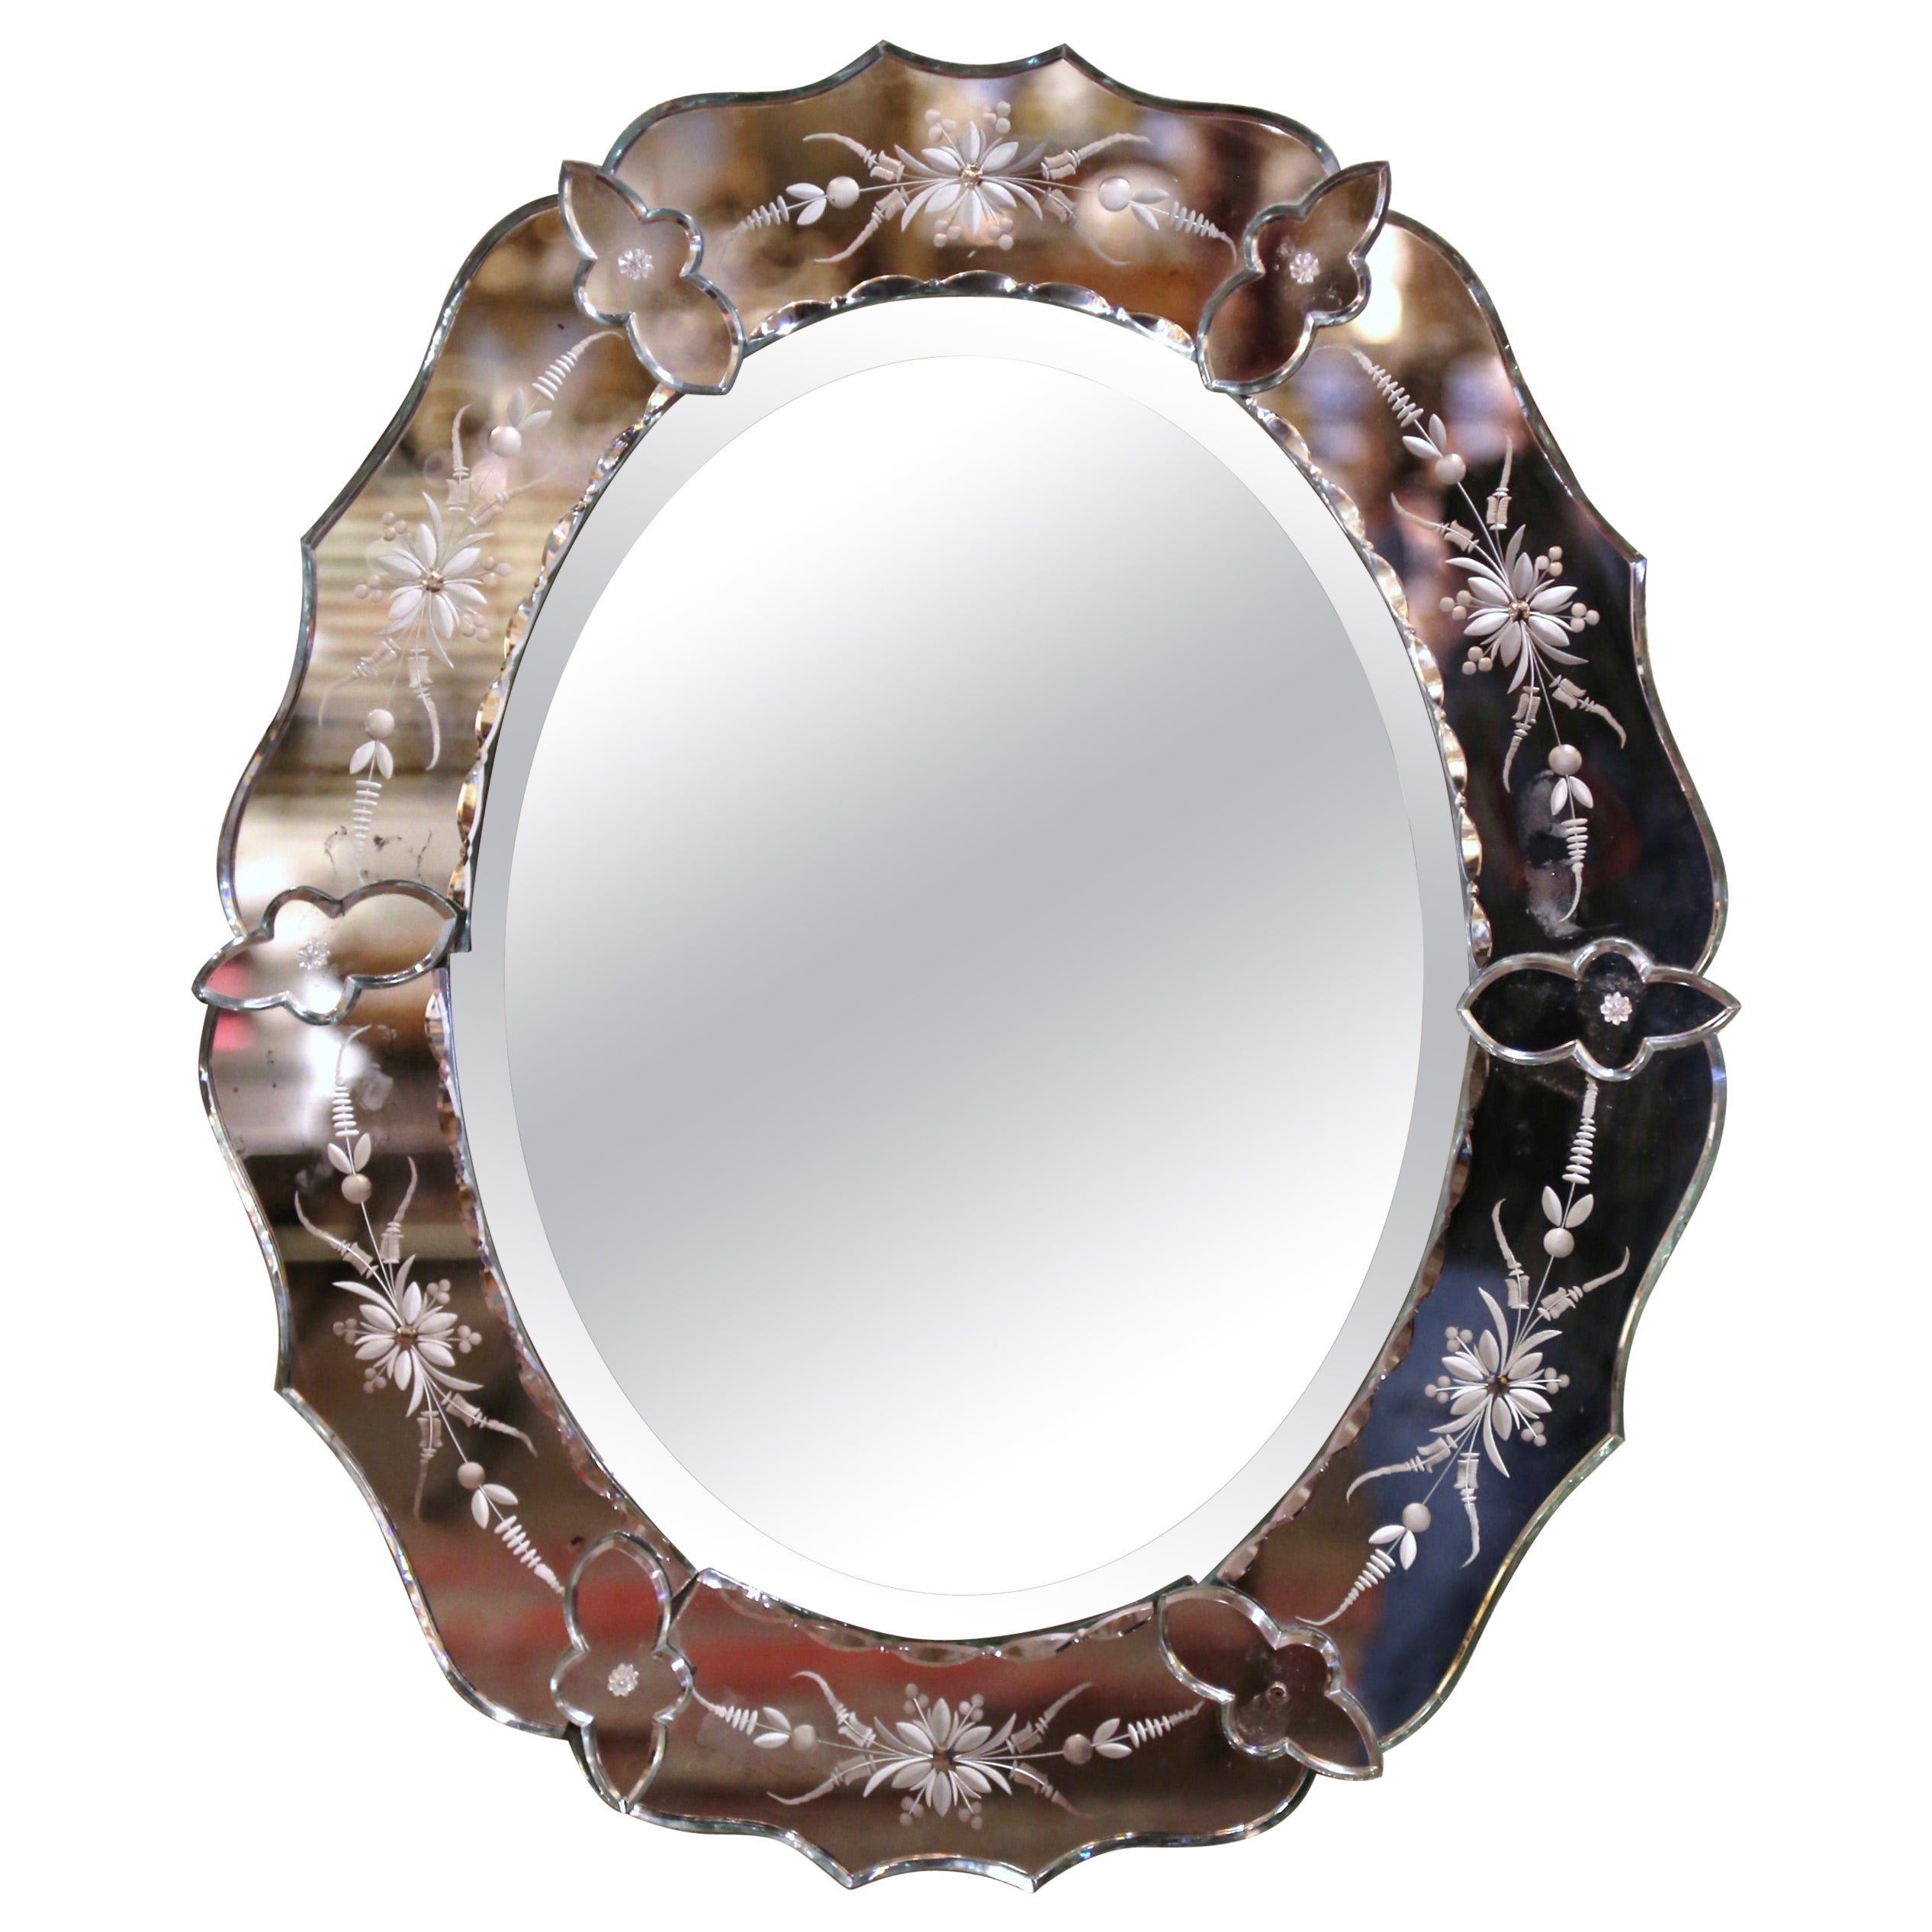 Midcentury Italian Venetian Oval Beveled Mirror with Painted Floral Etching For Sale